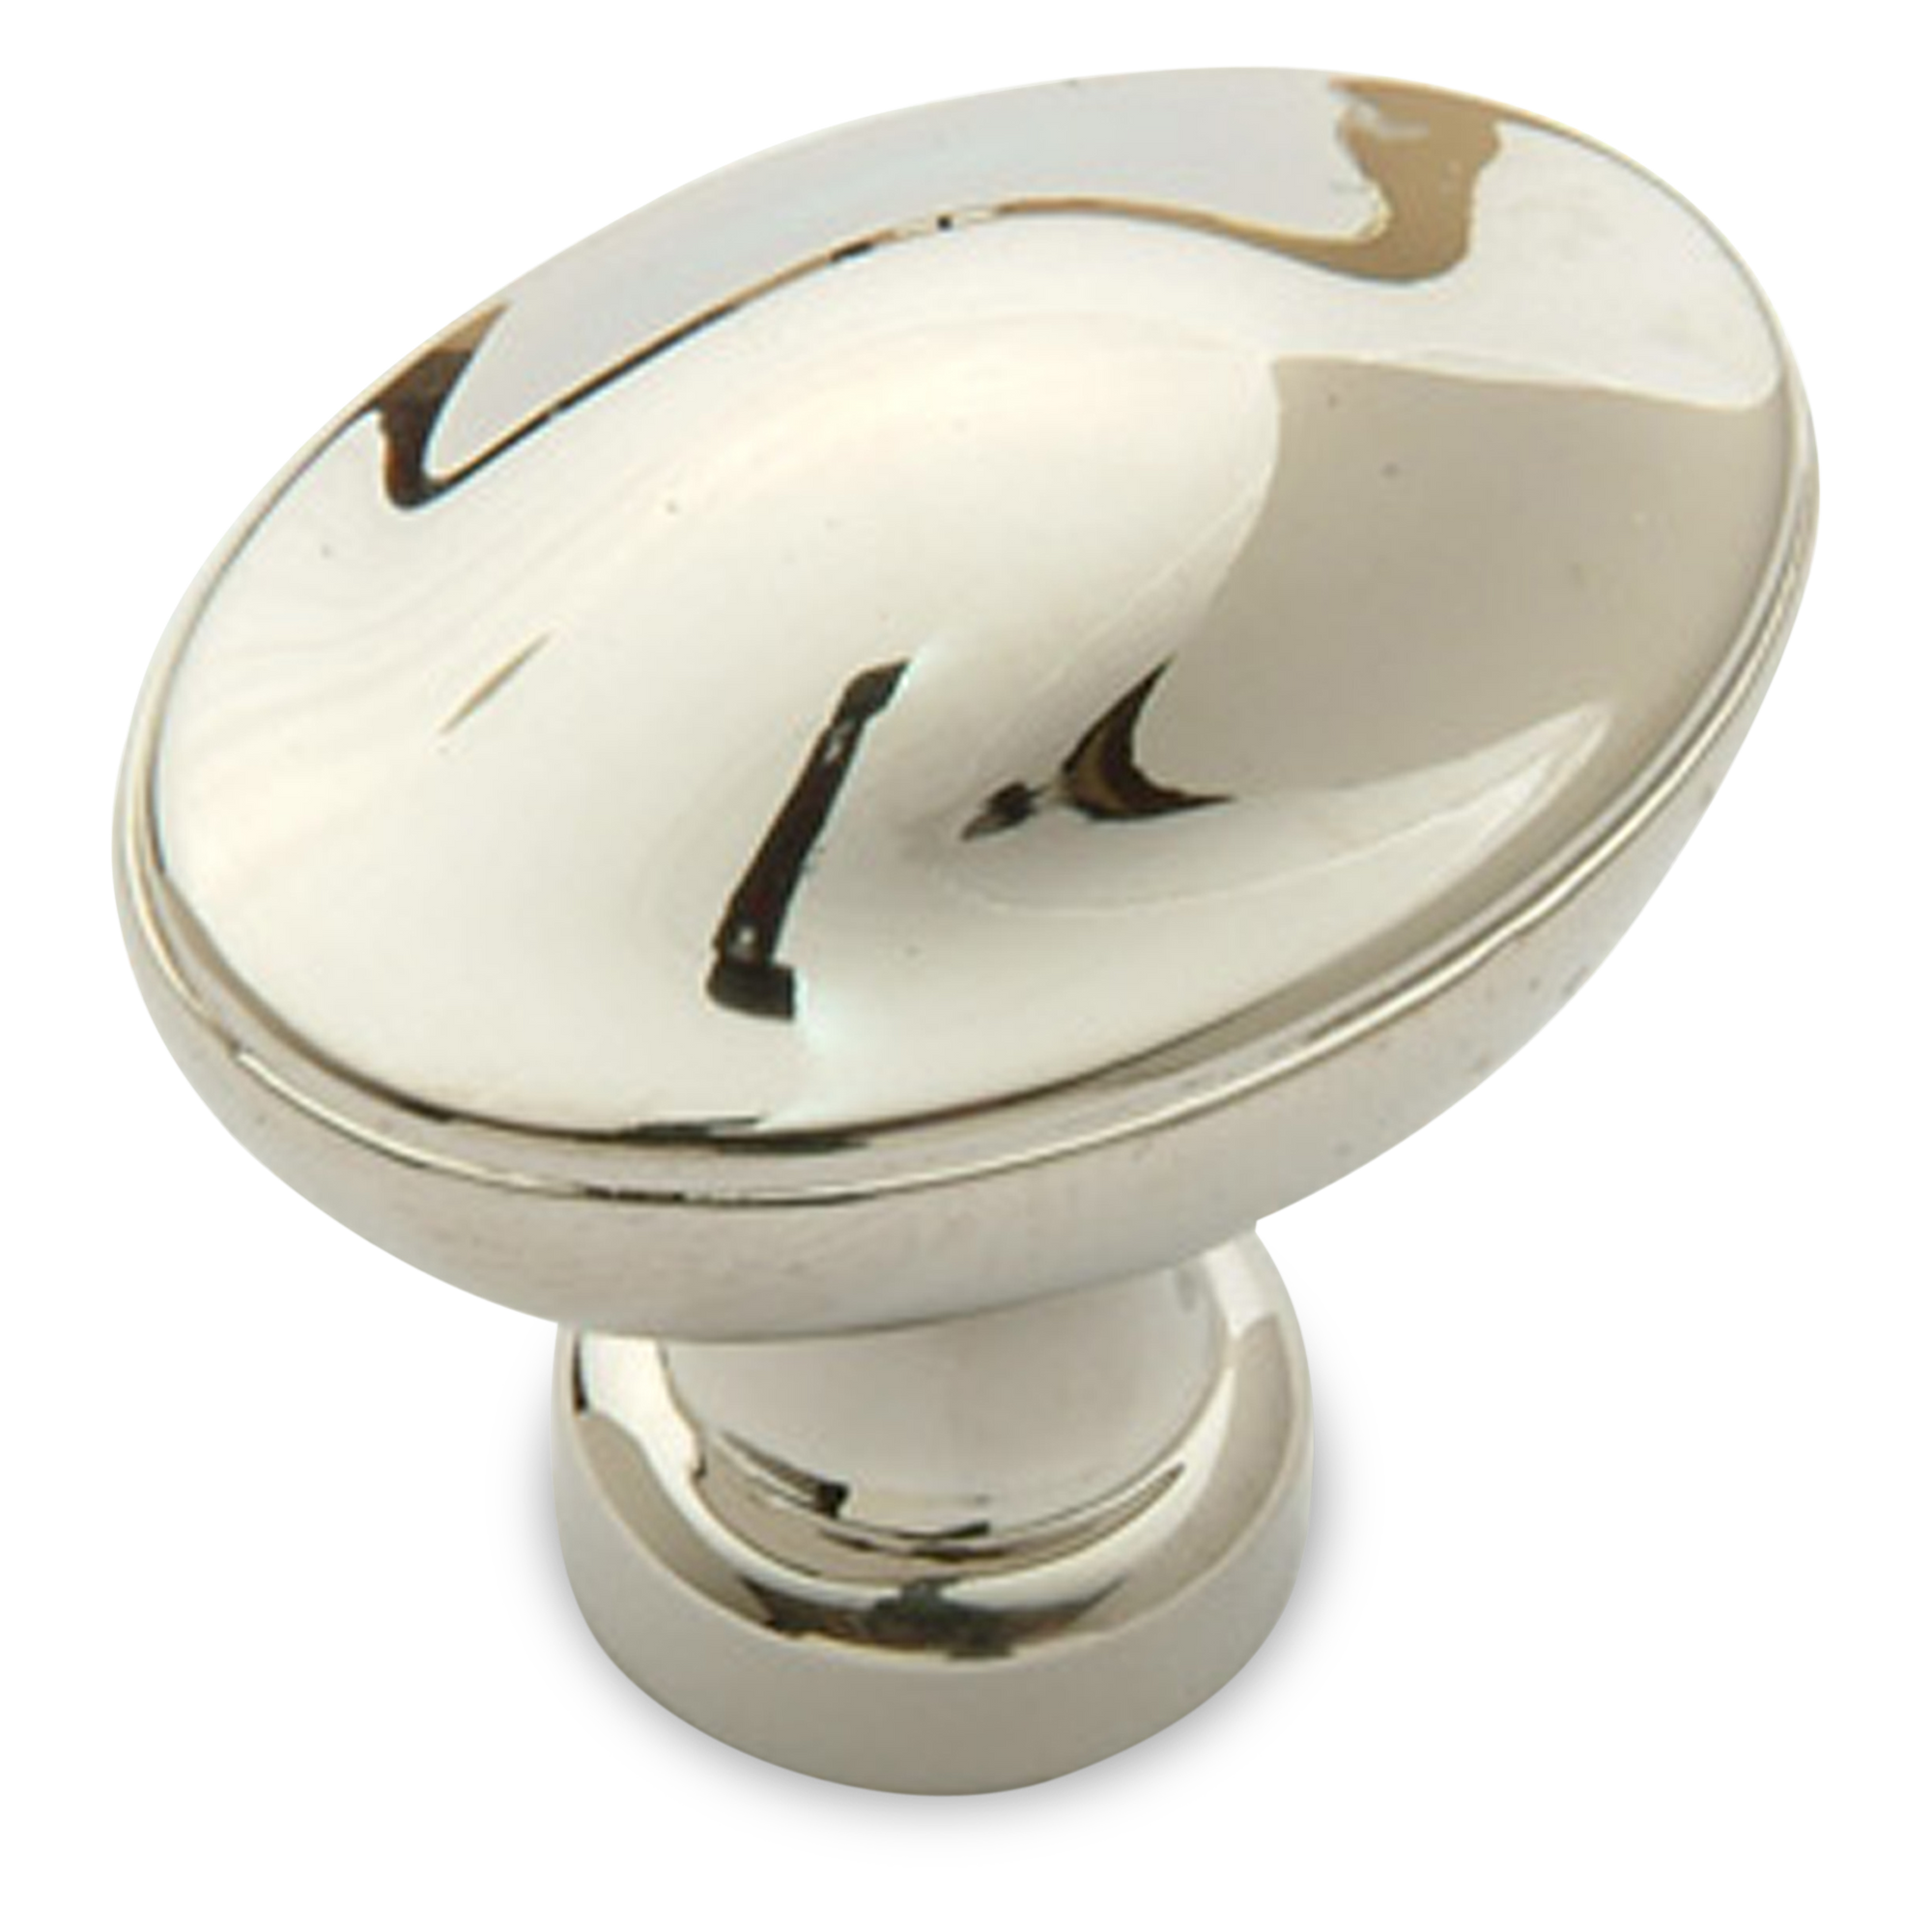 Simple yet elegant, the Denby knob features a spherical cut.